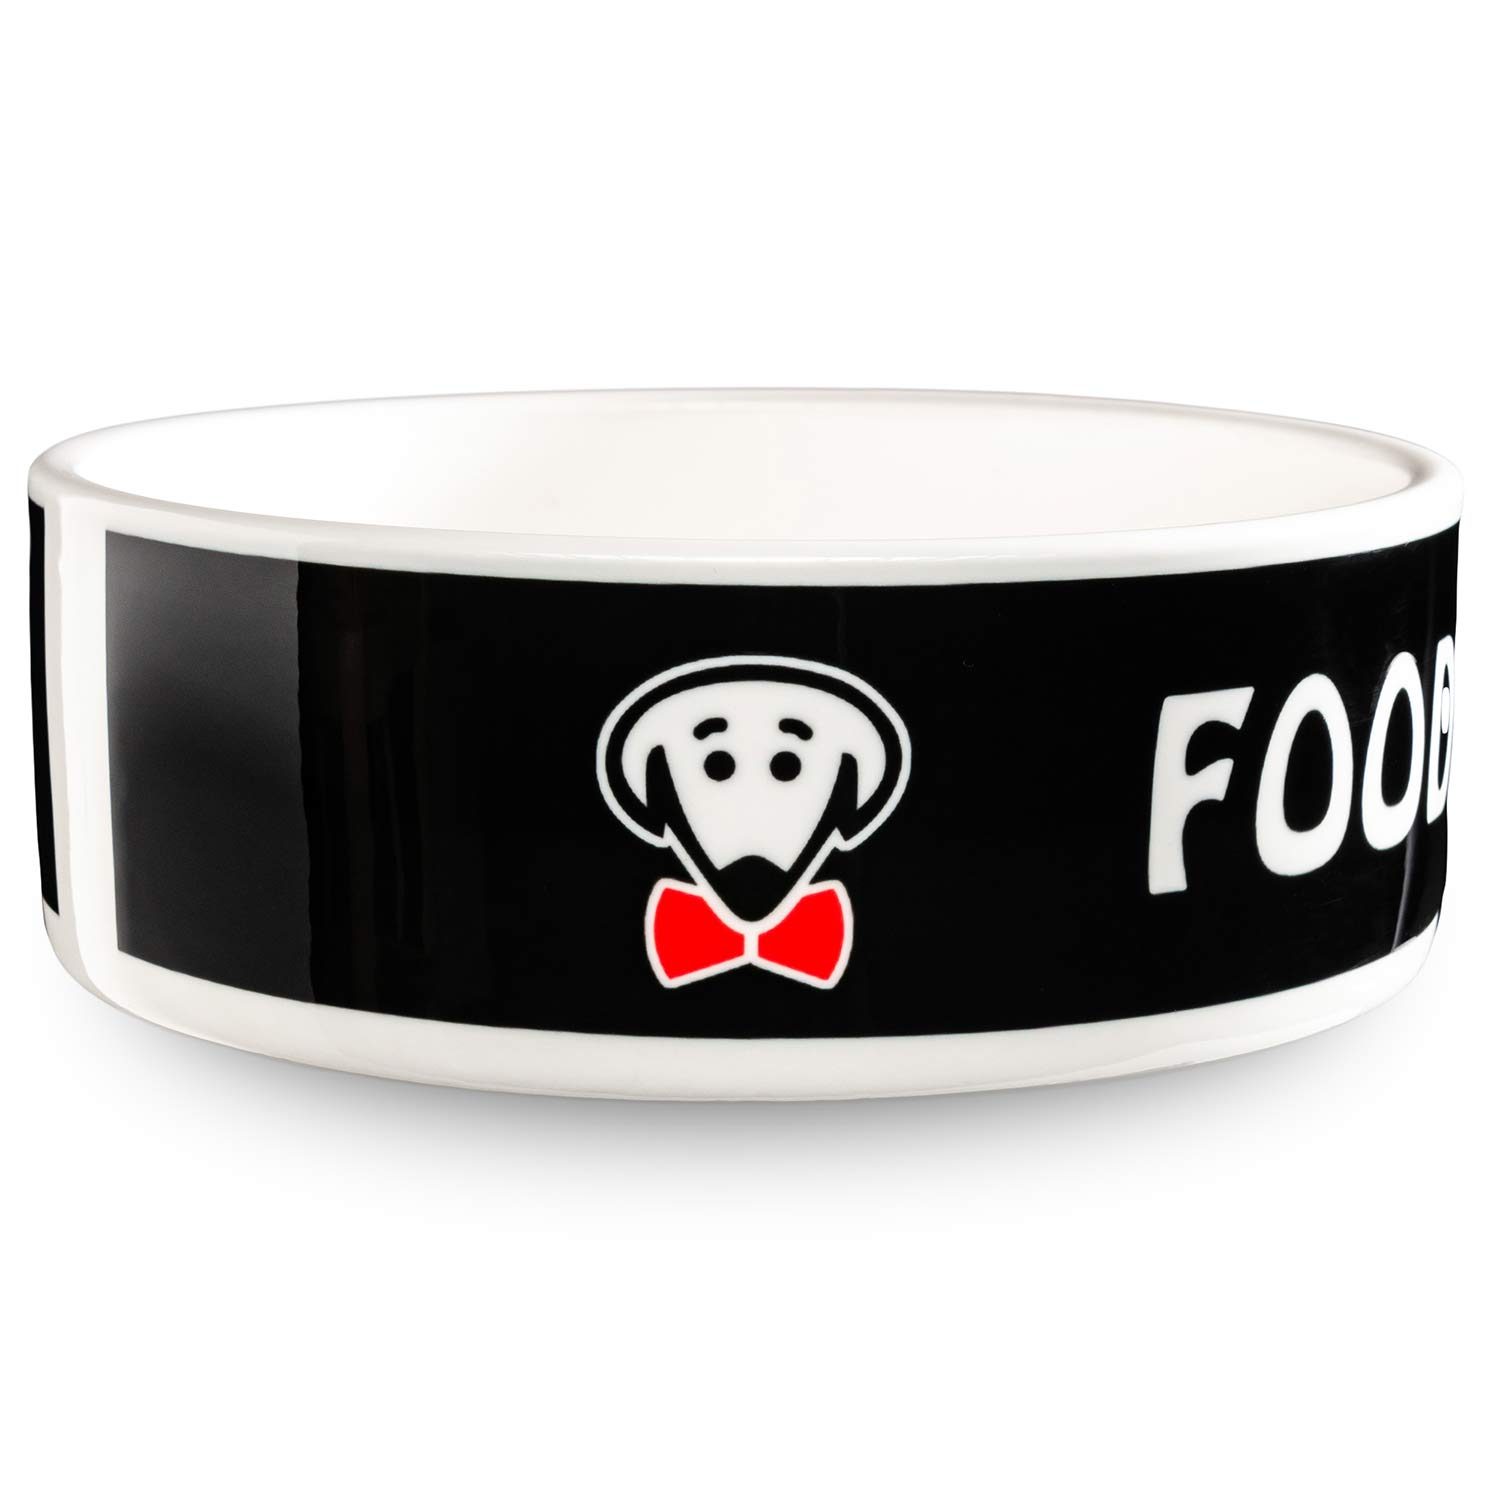 Food for the Boss pet bowl in black by Beau Tyler